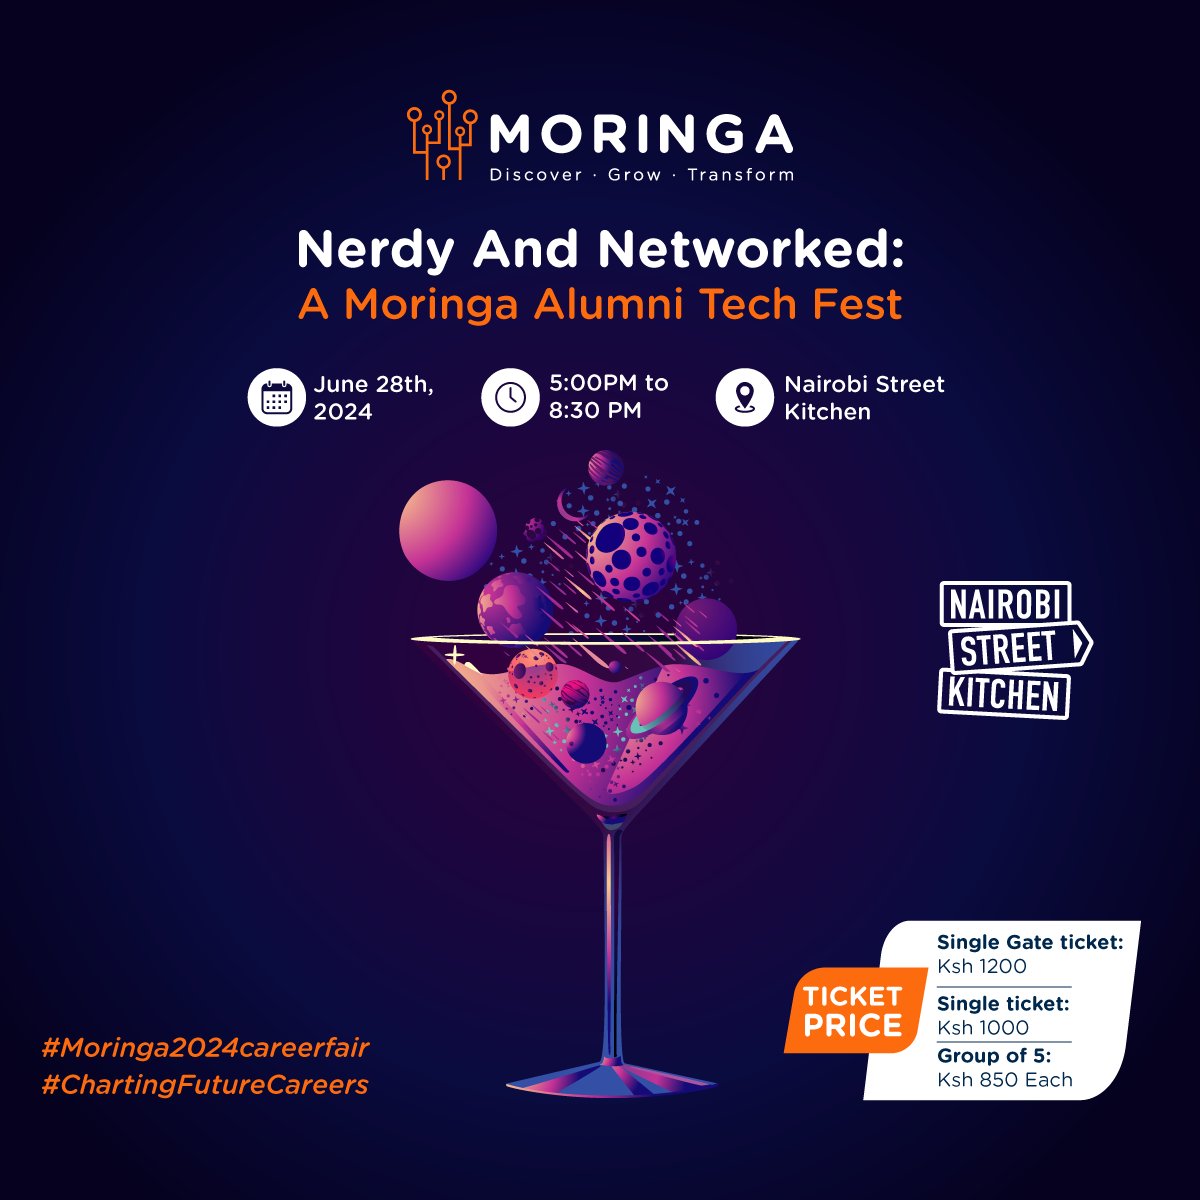 Calling all Moringa School Alumni! Get ready for this year's Alumni Cocktail: Nerdy And Networked! Join us on June 28th, 5:00 PM at Nairobi Street Kitchen for reconnecting, challenges, bites, and inspiring conversations. RSVP here: beta.paydexp.com/nerdy-and-netw…